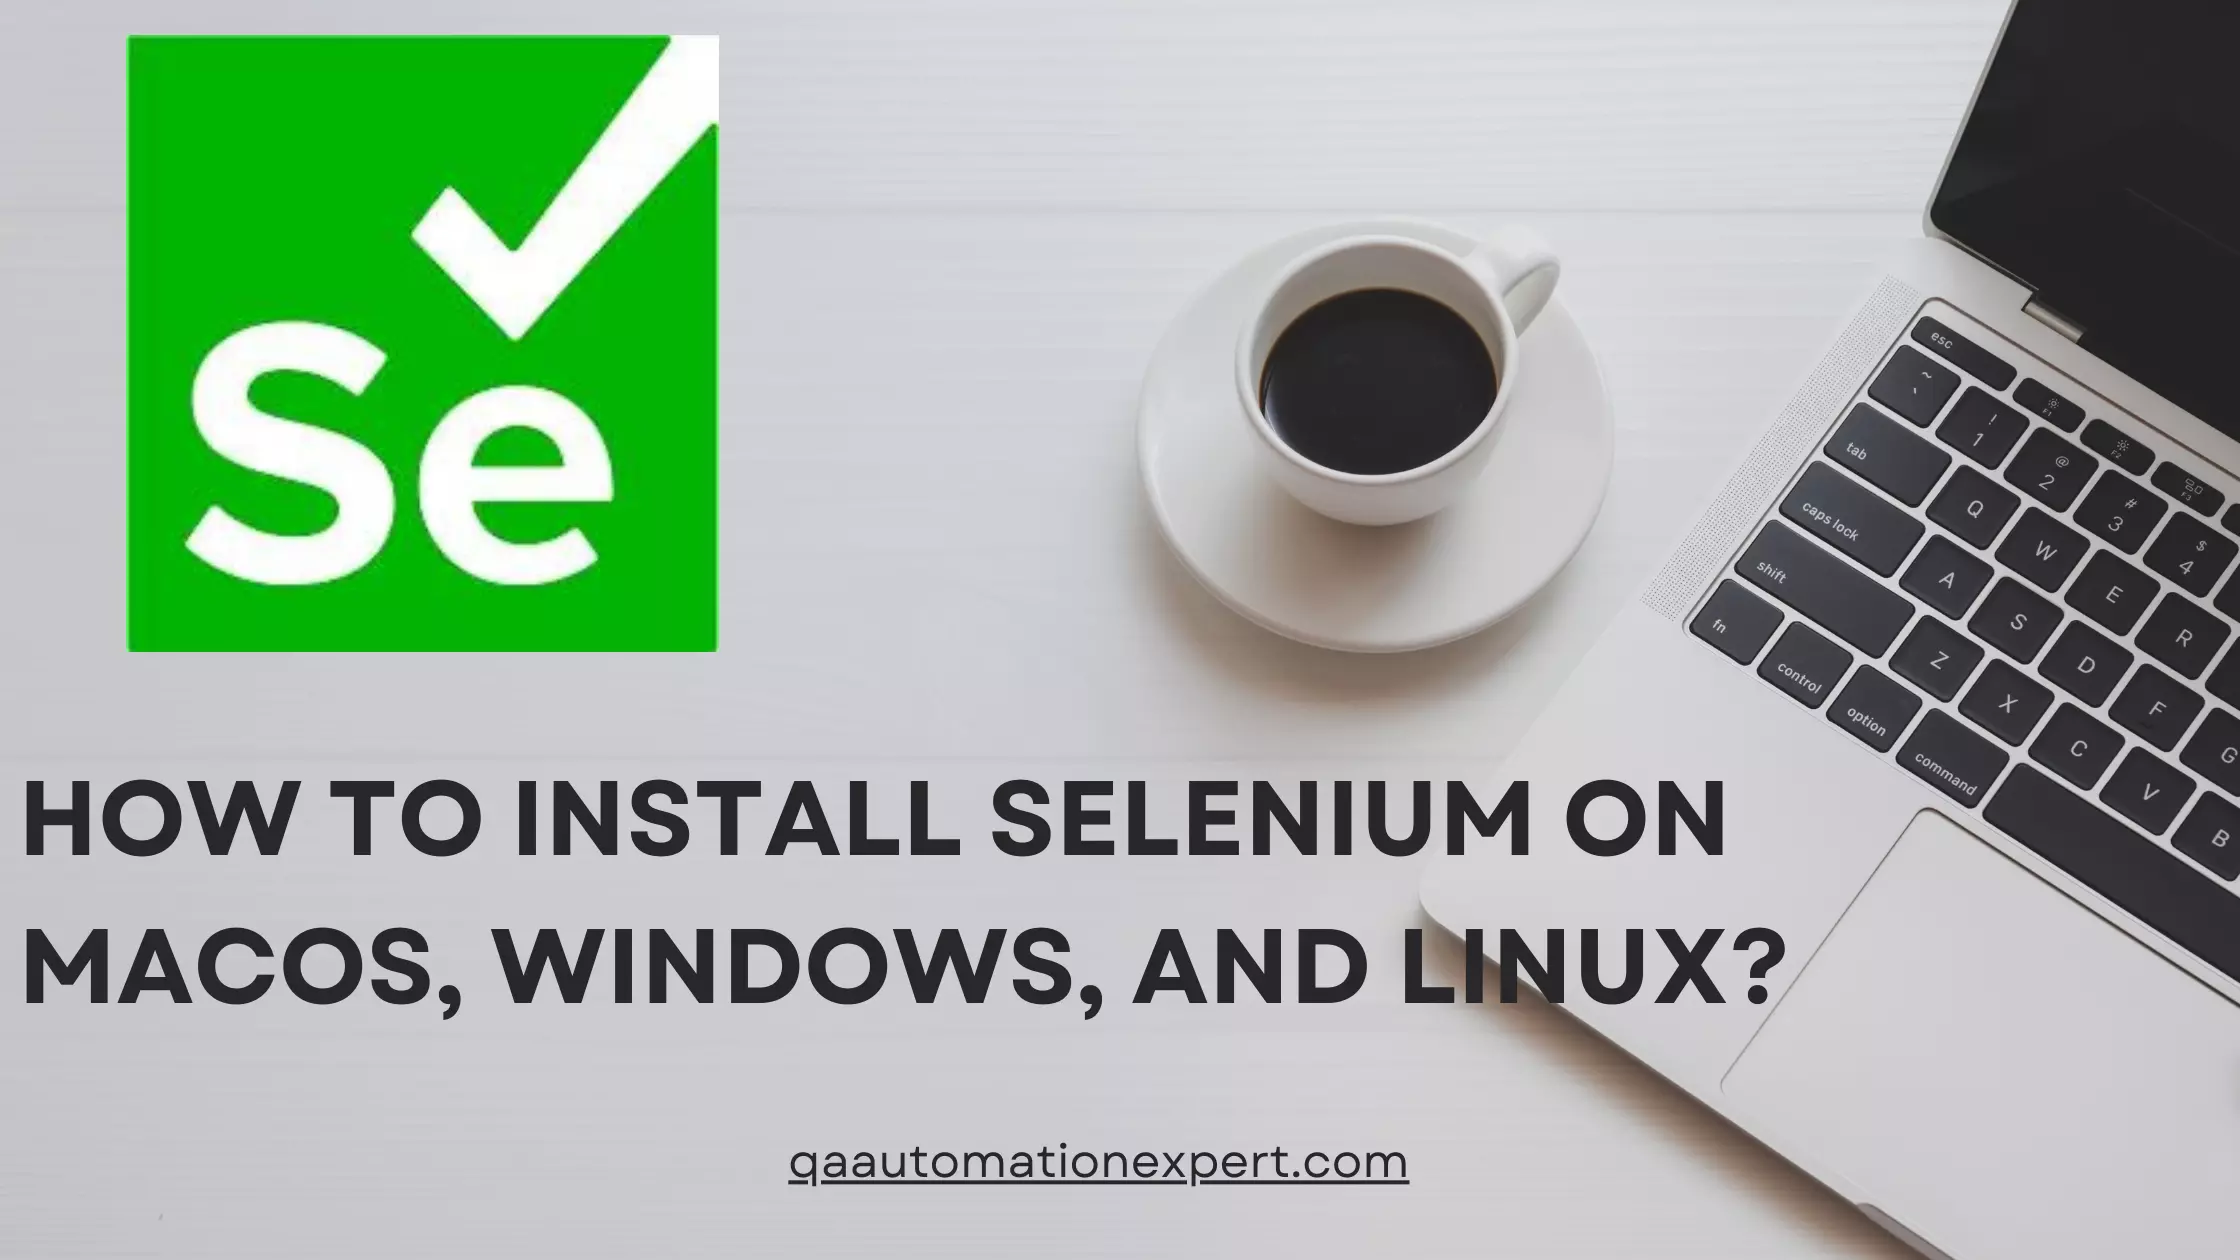 How to install Selenium on macOS, windows, and Linux?